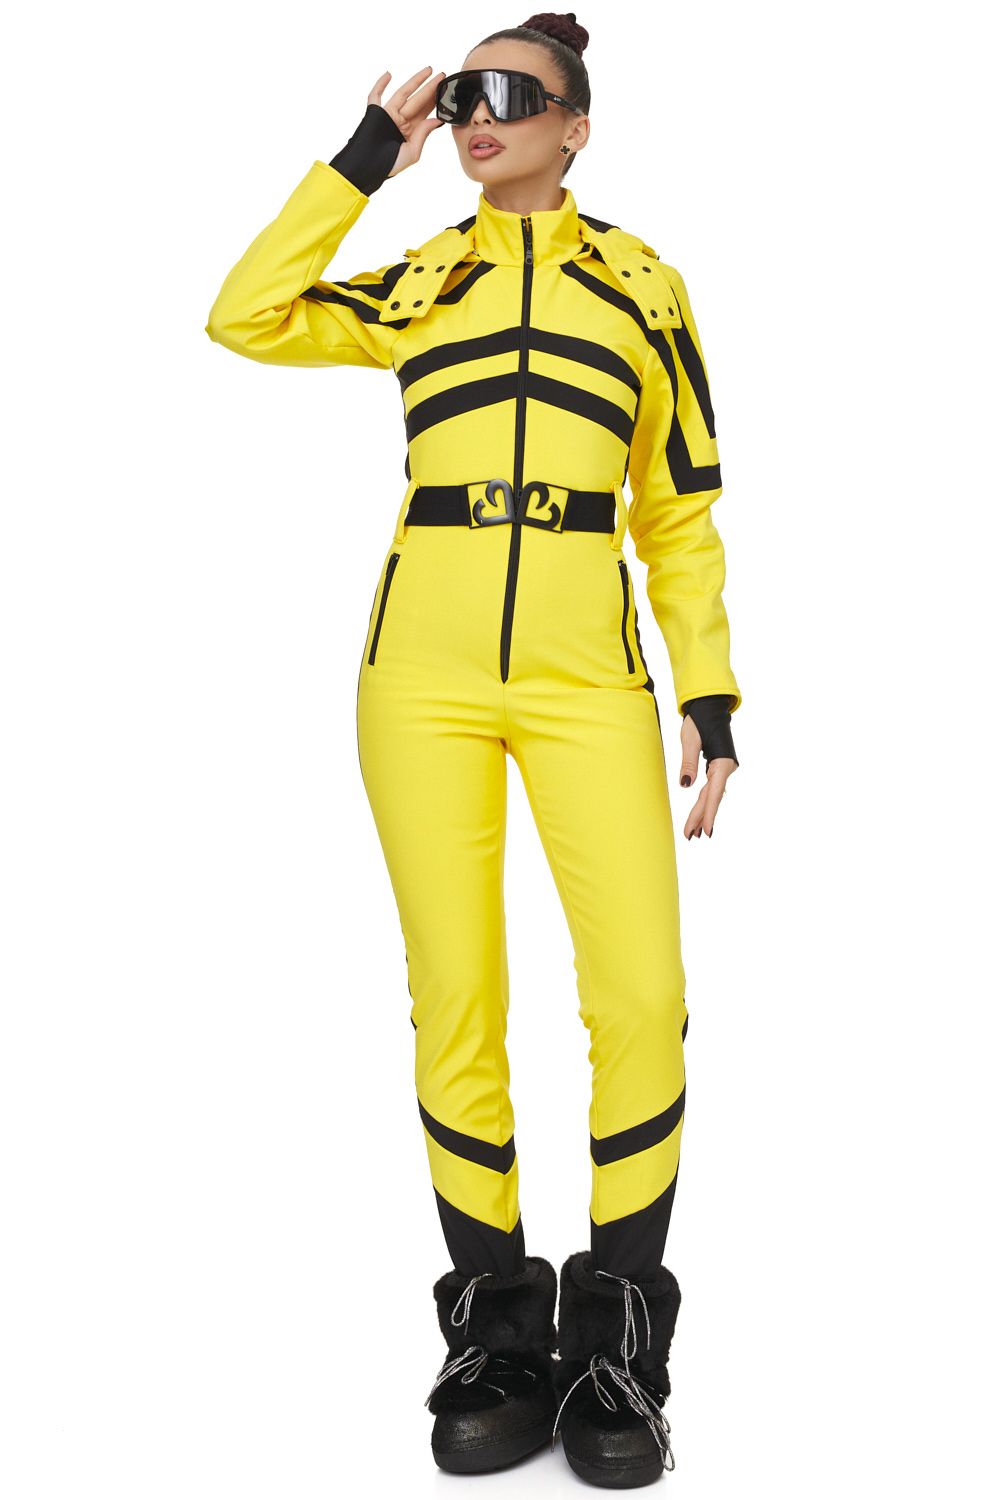 Abyem Bogas yellow casual ski overalls